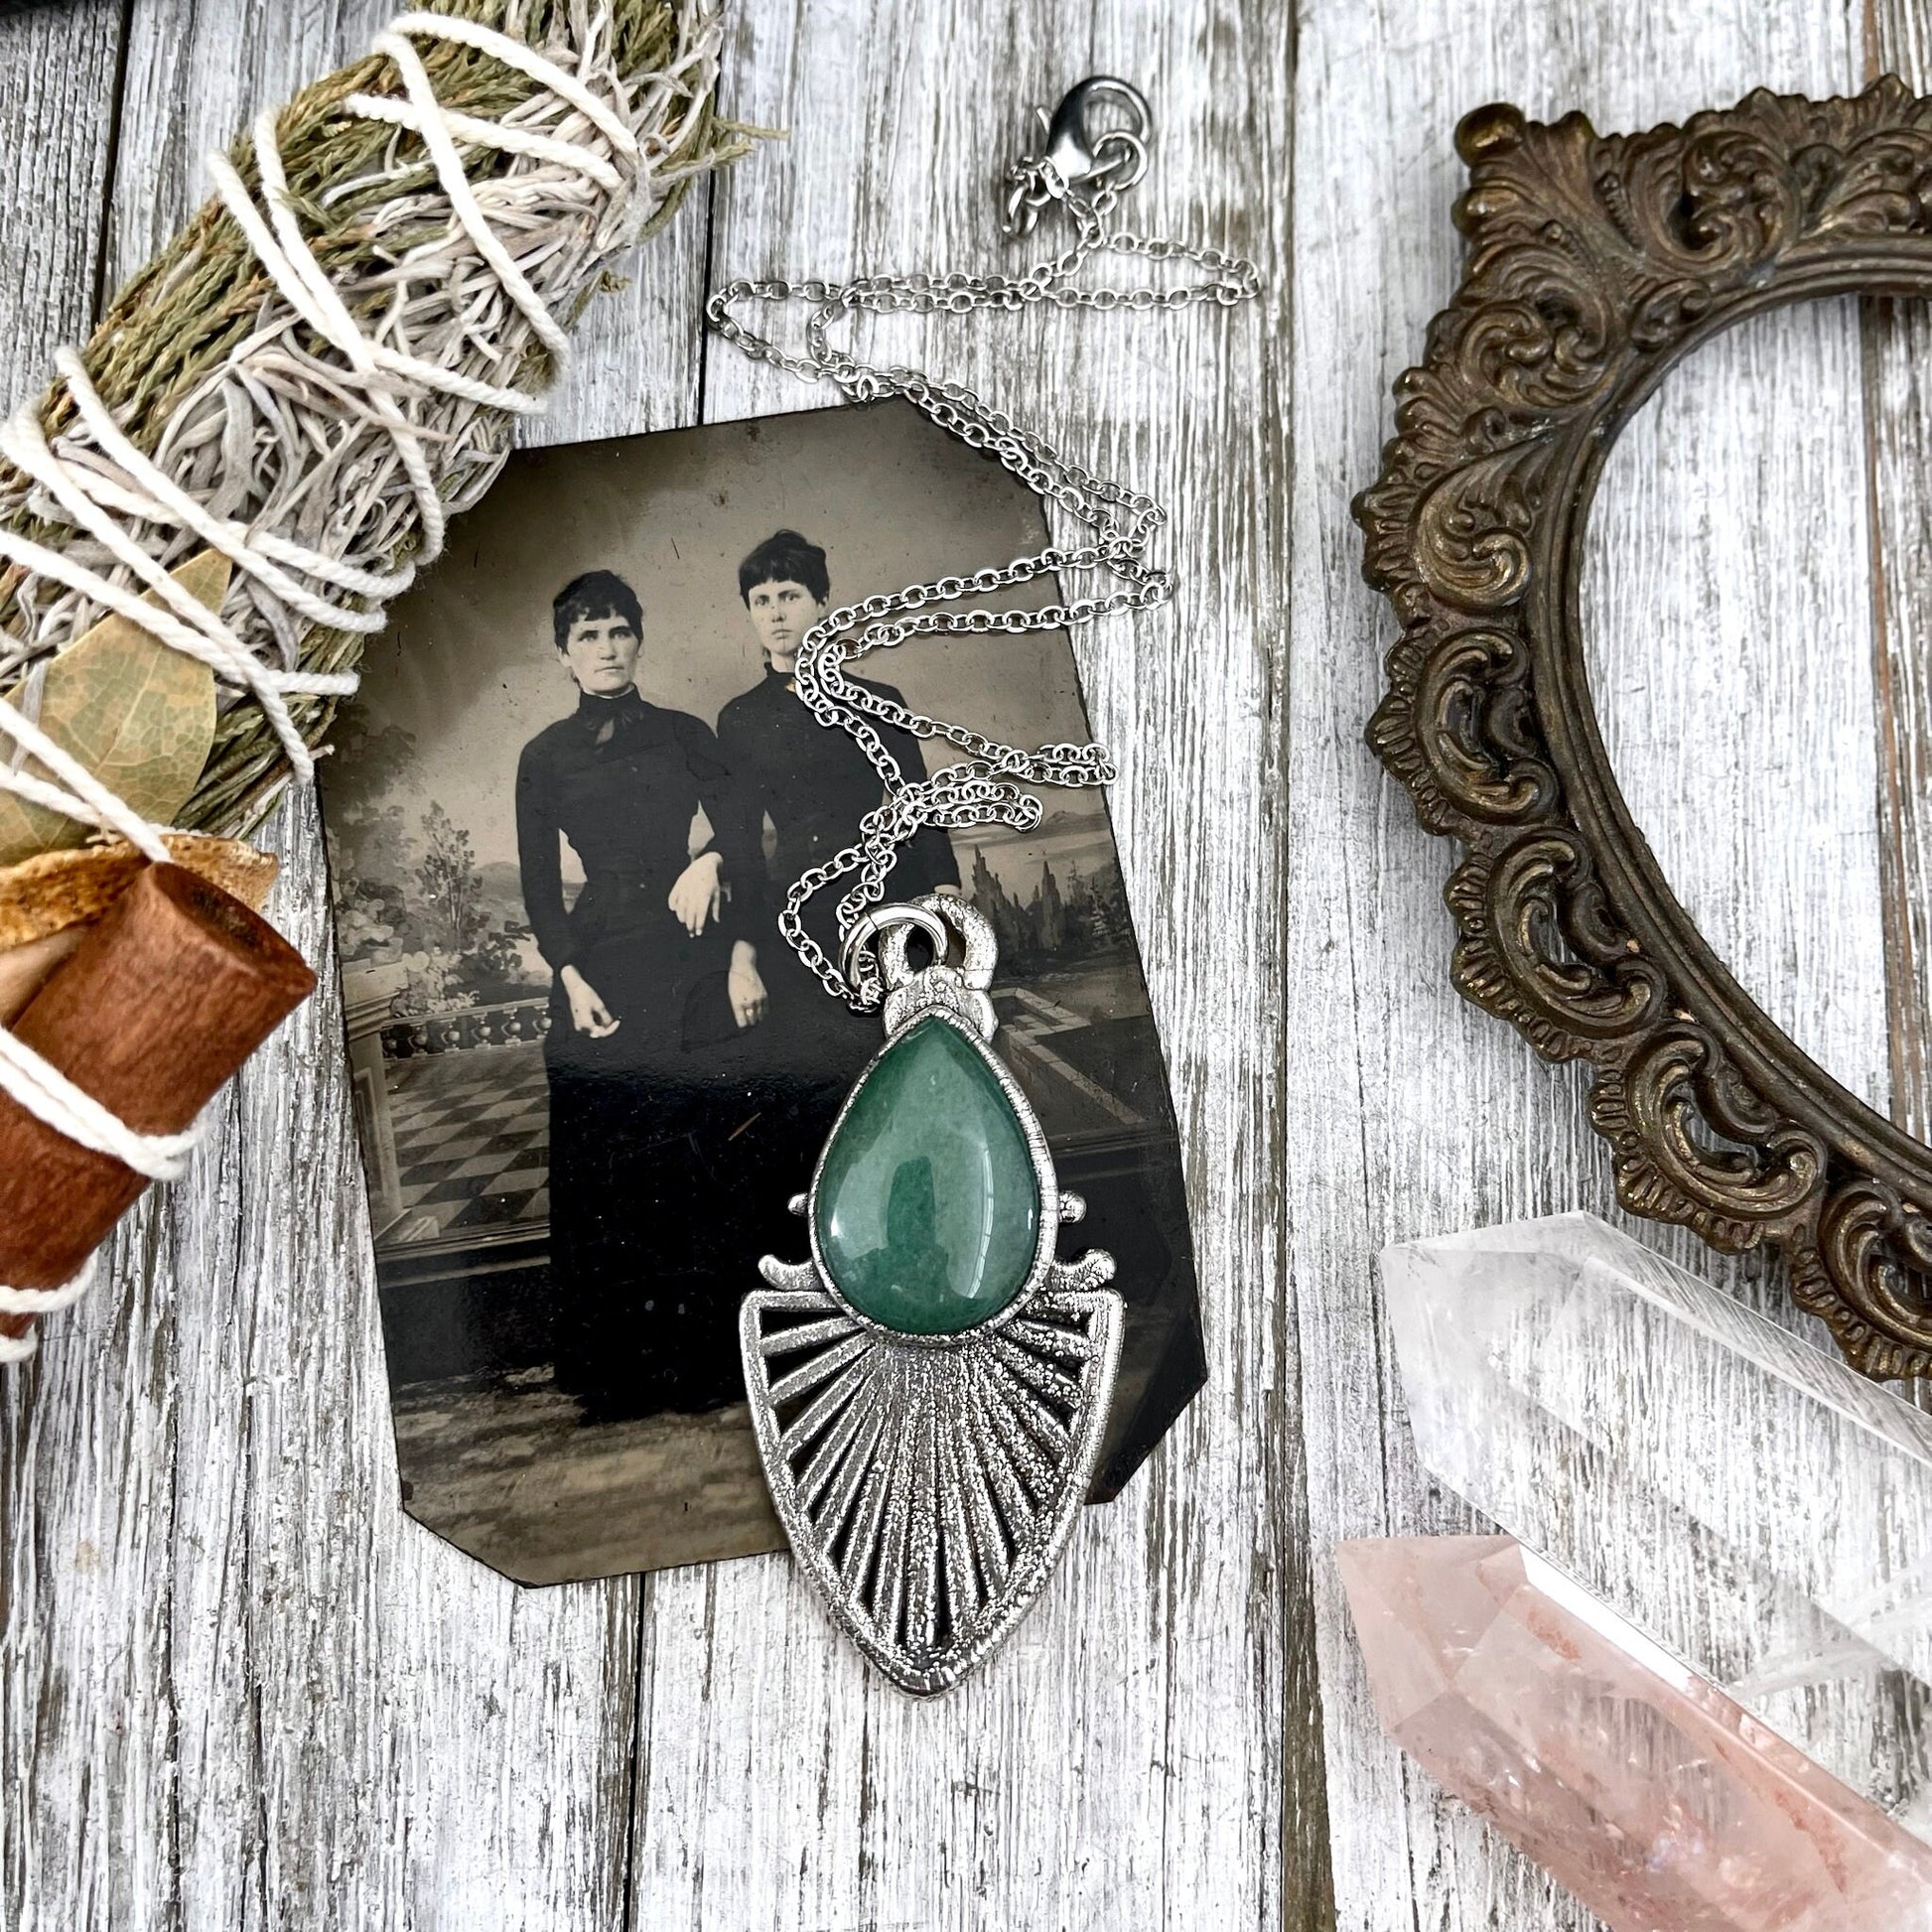 Moss & Moon Collection - Green Aventurine Crystal Necklace set in Fine Silver / / Alternative Witchy Pendent Boho Electroformed Jewelry